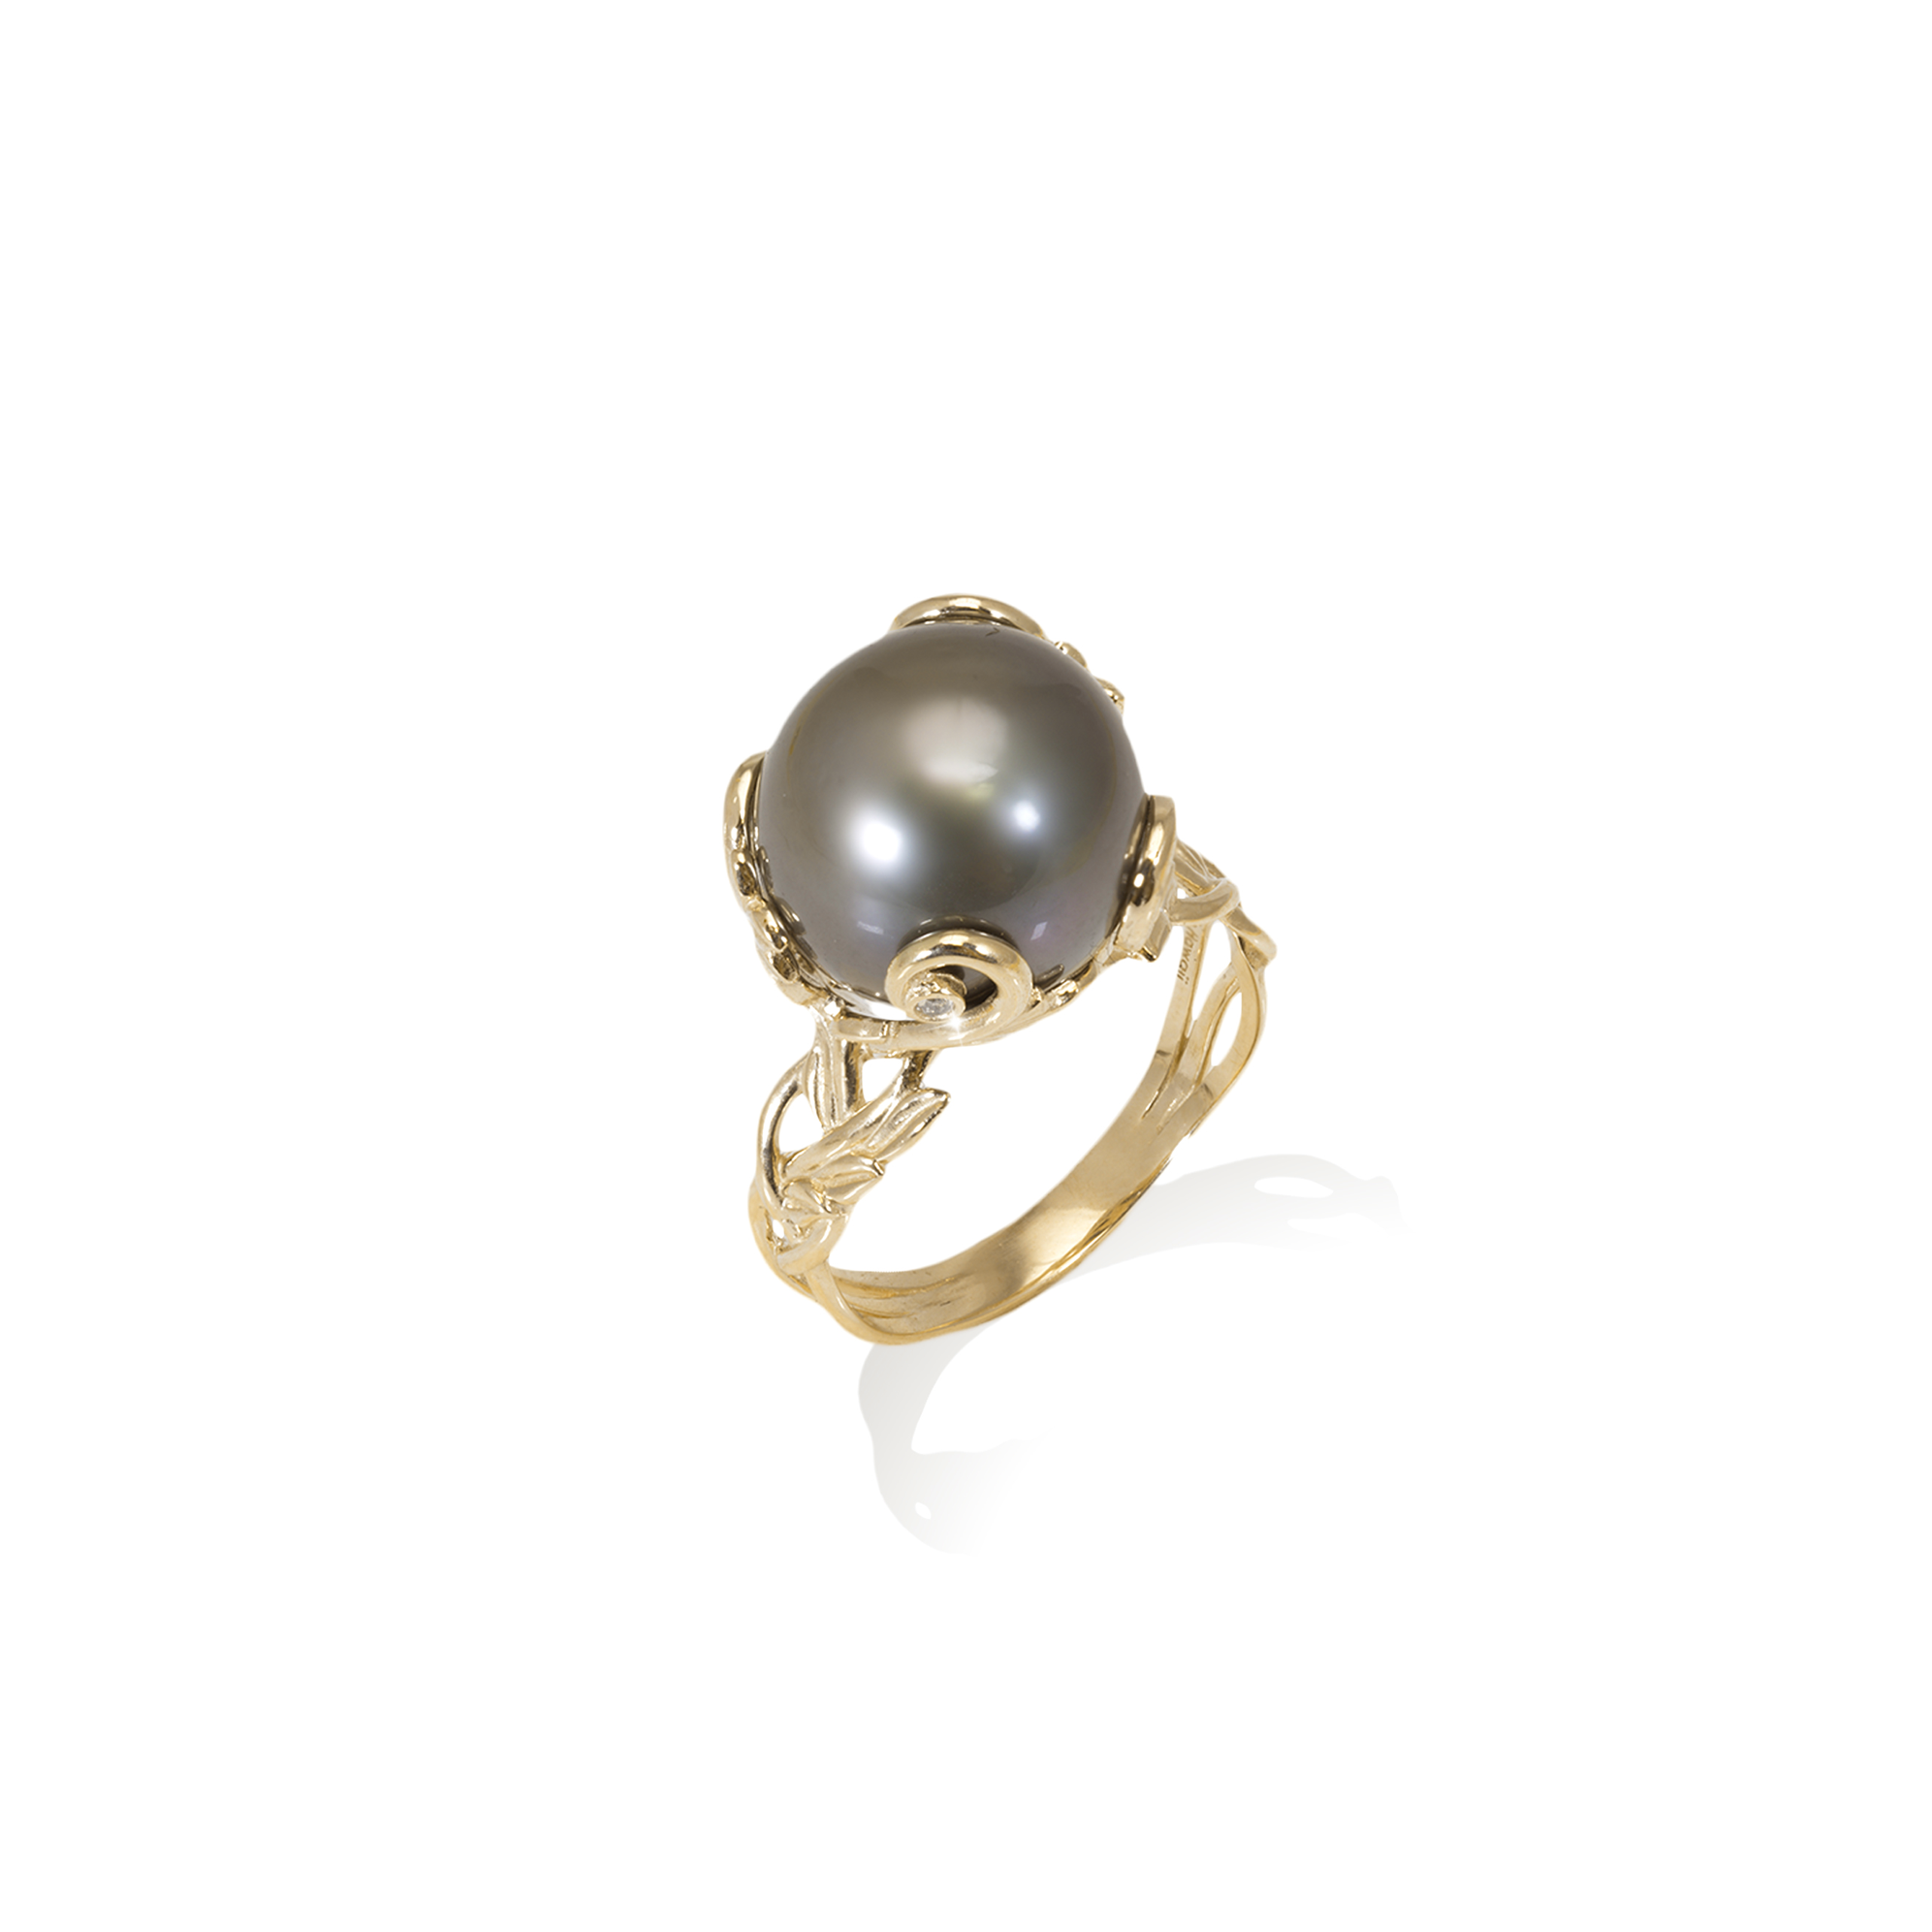 Living Heirloom Tahitian Black Pearl Ring in Gold with Diamonds - 12-13mm